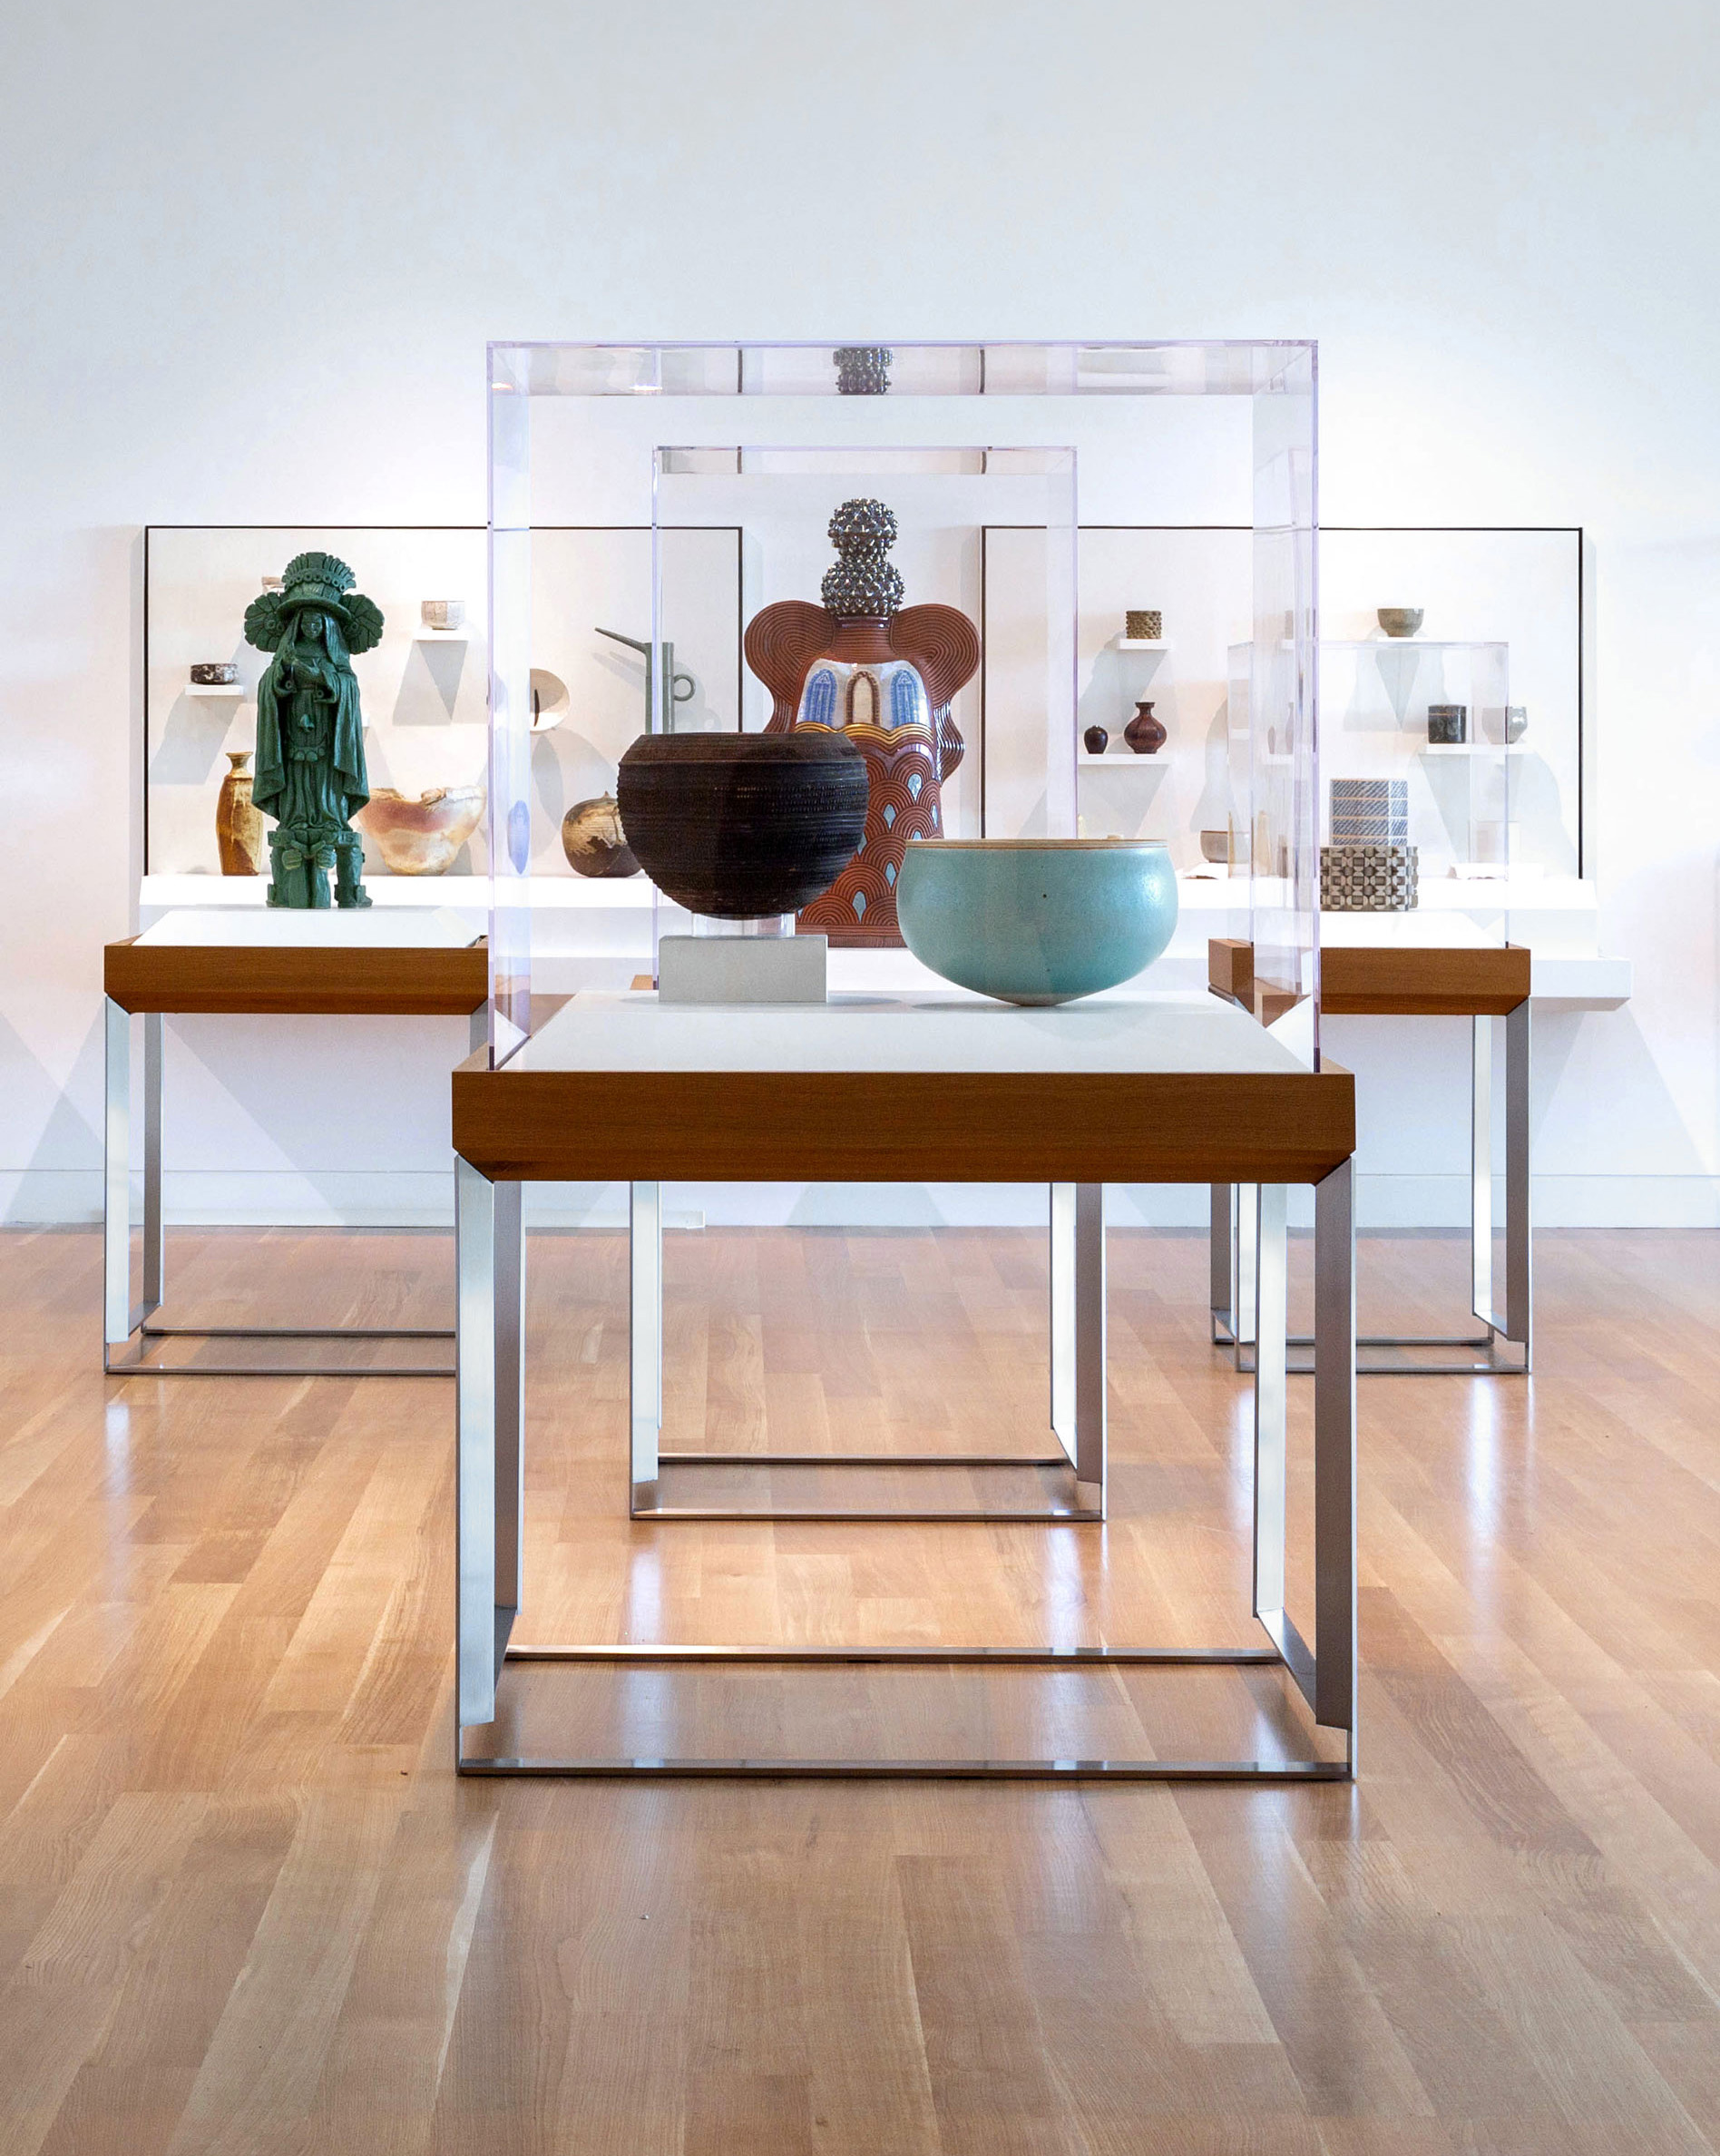 photo of a room full of glass encased artifacts and pottery or sculptural pieces, by Nick Sloff '92 A&A